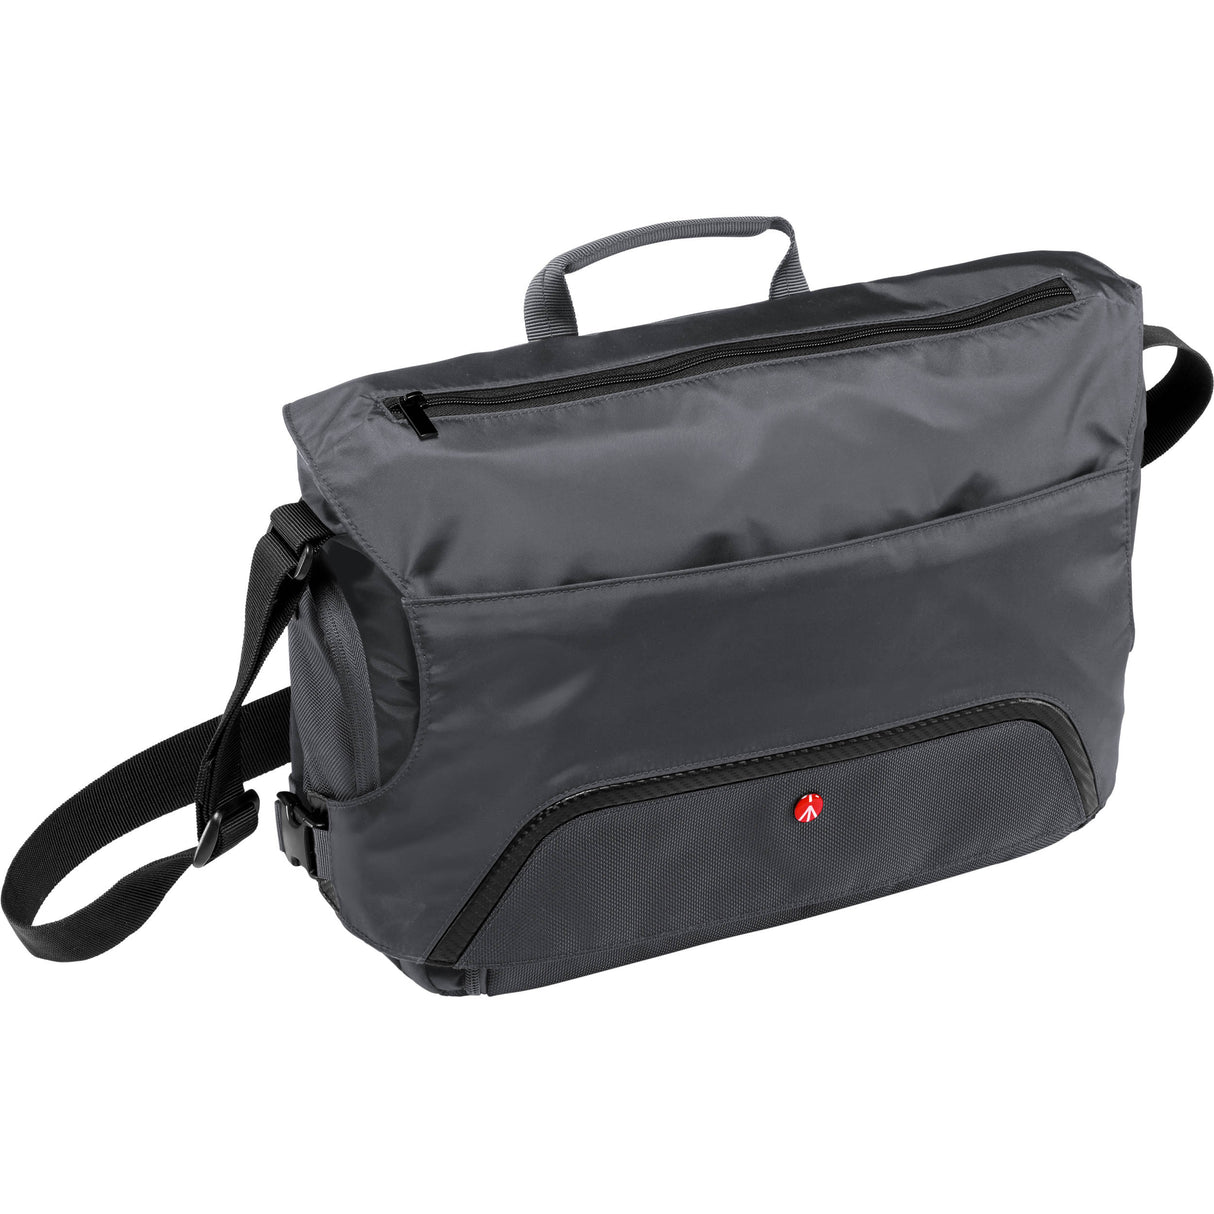 Manfrotto Large Advanced Befree Messenger Bag Gray